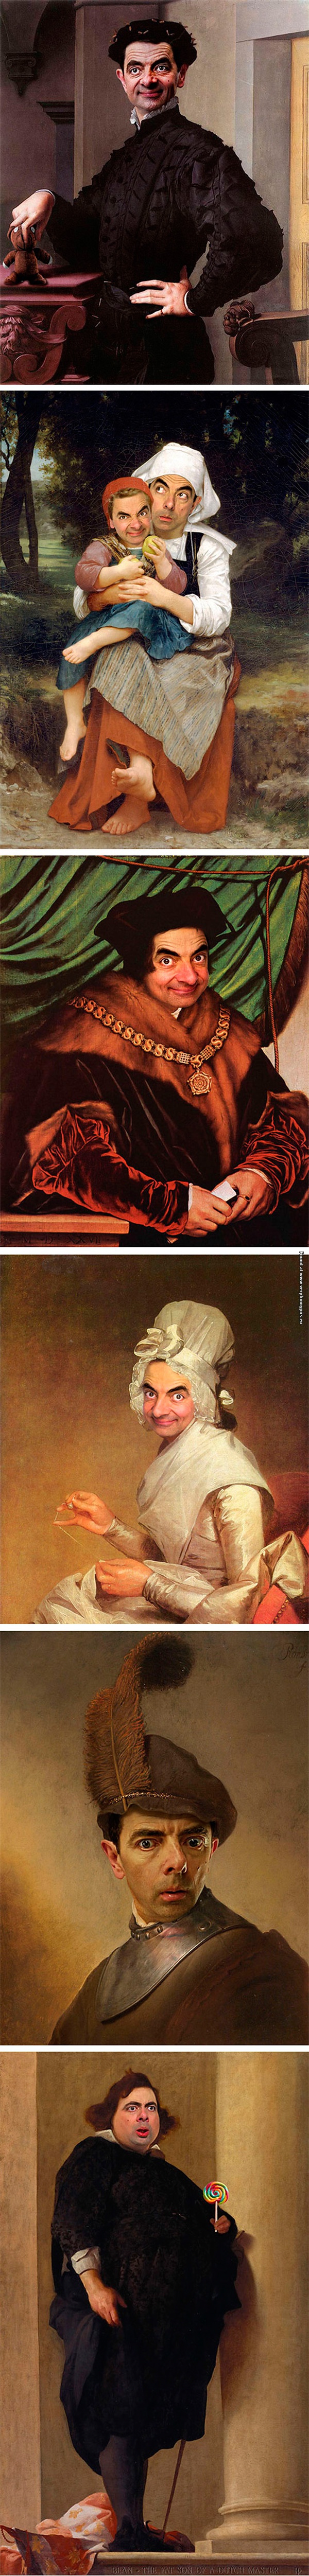 funny-pictures-mr-bean-in-famous-paintings